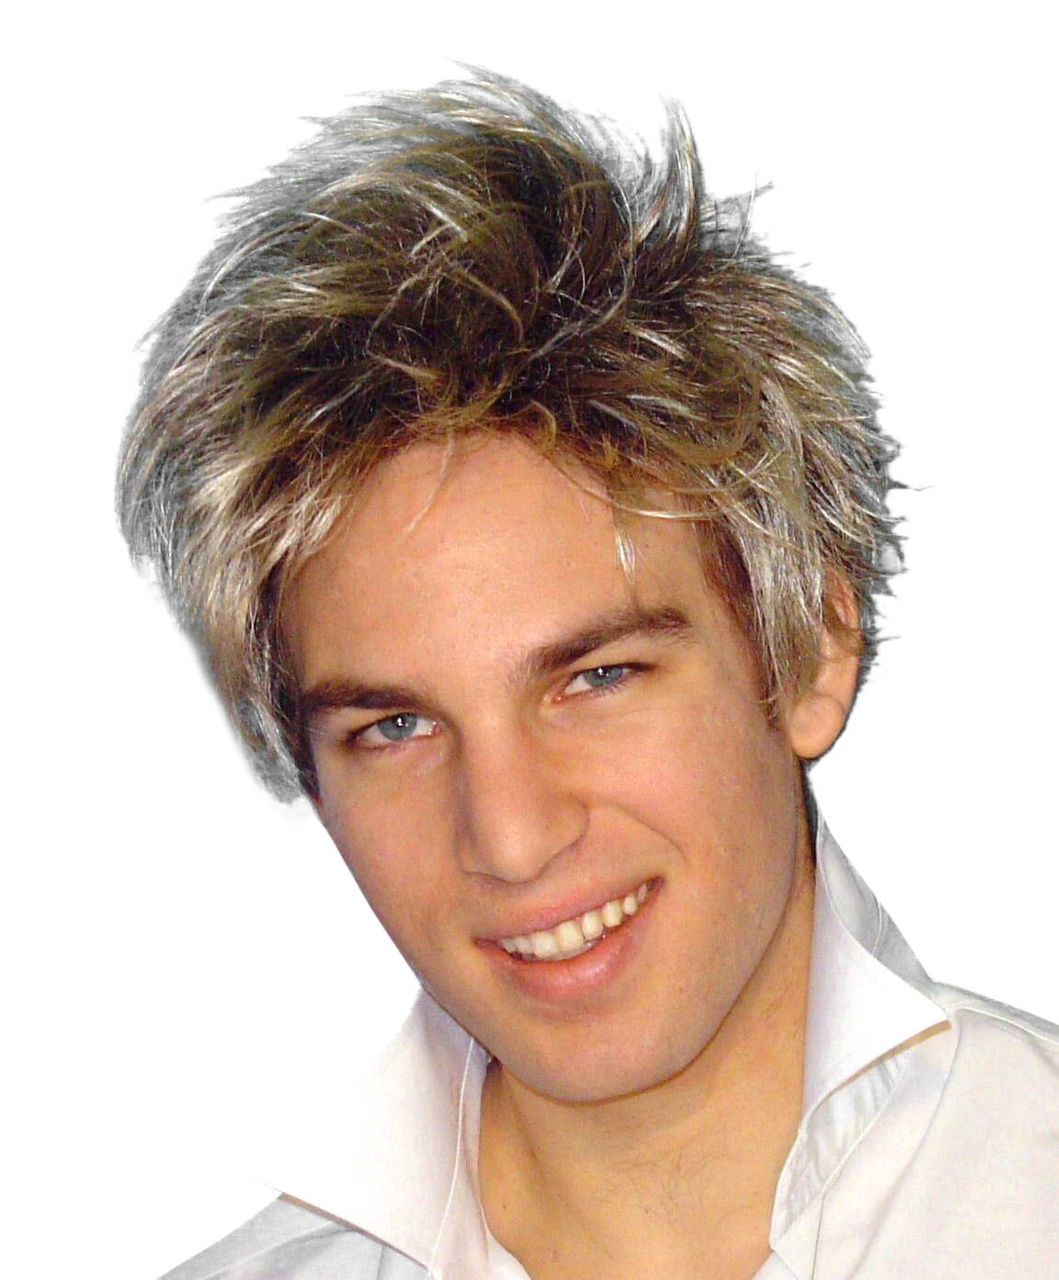 Spunky Guy Blonde With Dark Roots Costume Wig The Wig Outlet